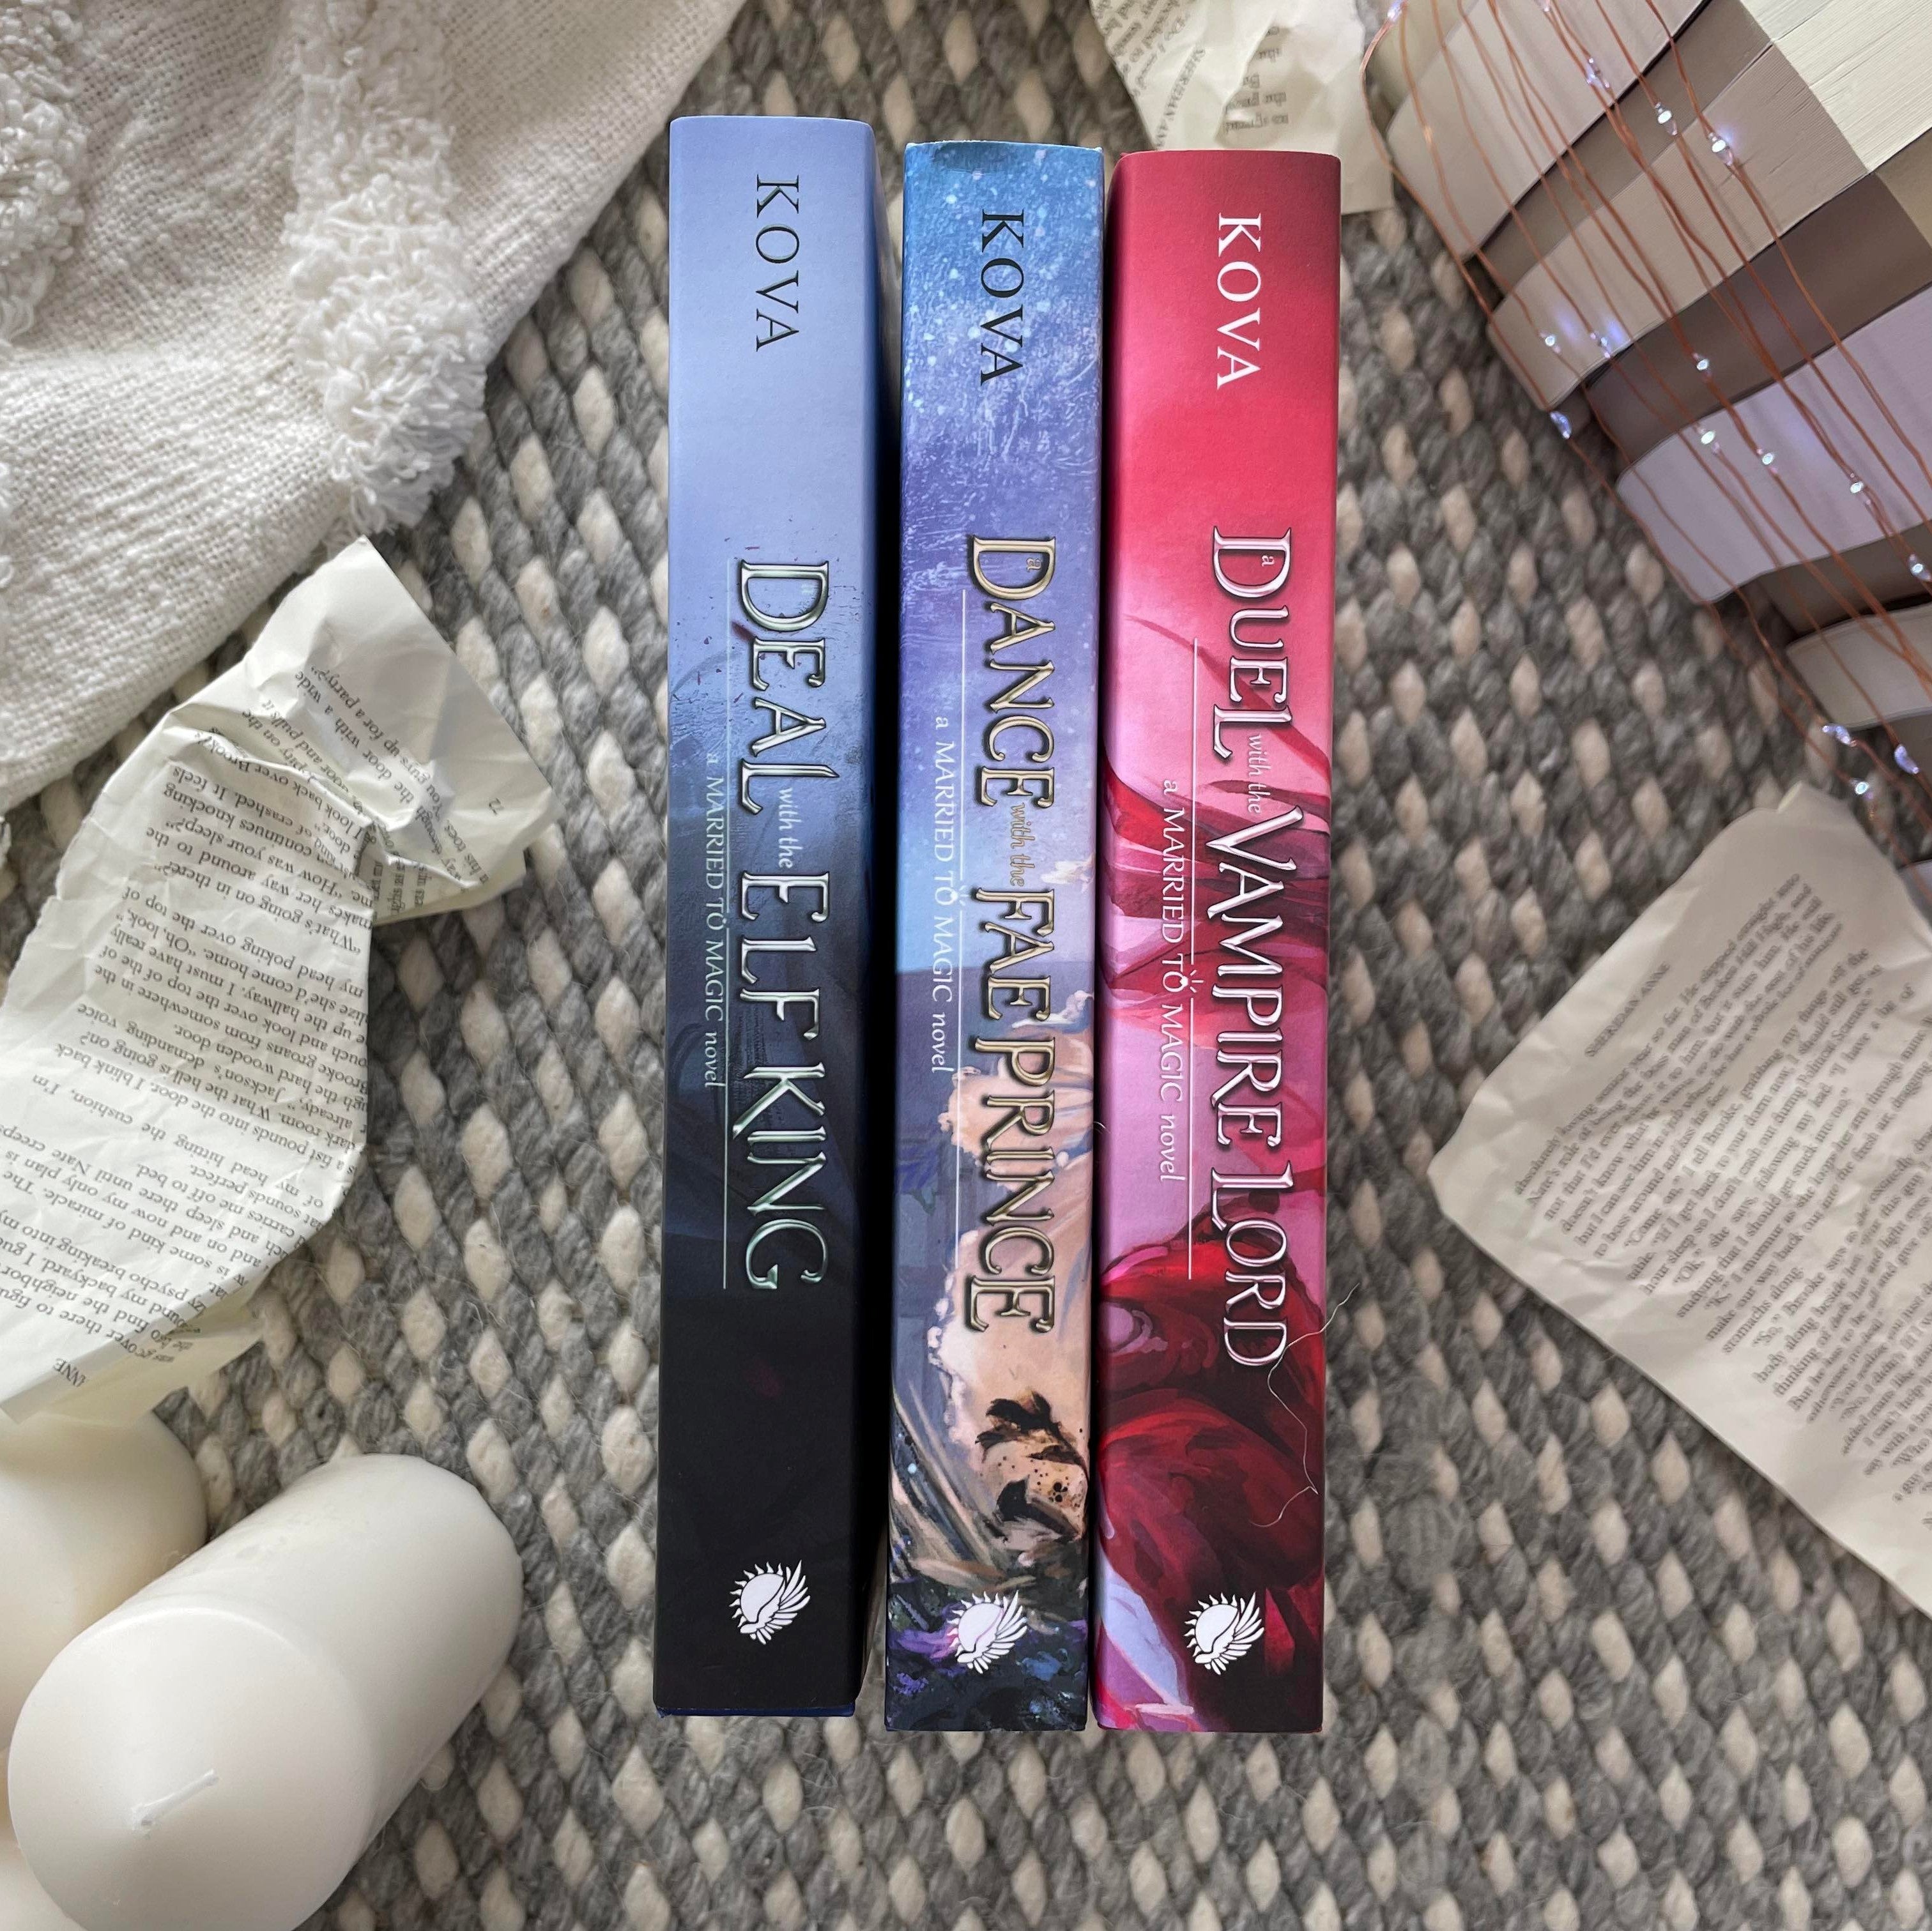 Married to Magic (HARDCOVERS) by Elise Kova